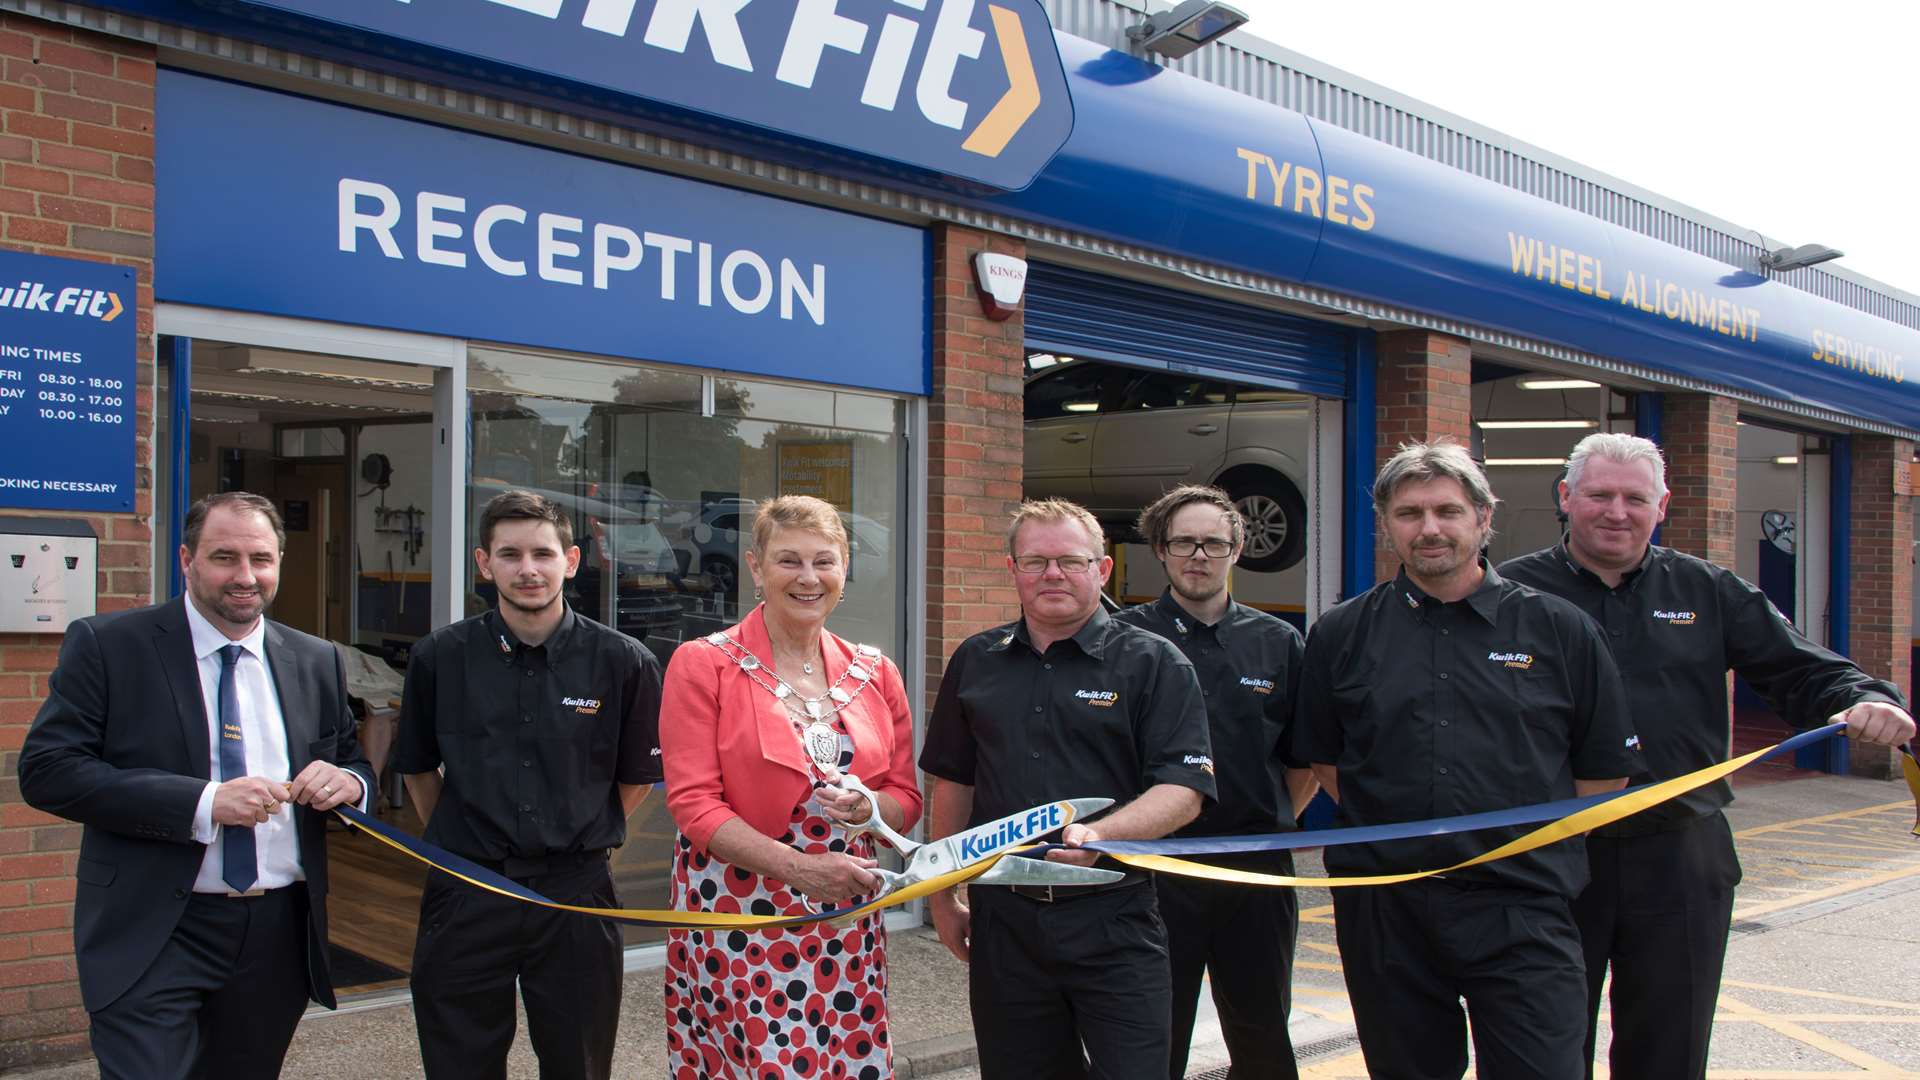 The Sheriff of Canterbury, Cllr Rosemary Doyle, cuts the ribbon on the revamped Whitstable workshop with staff